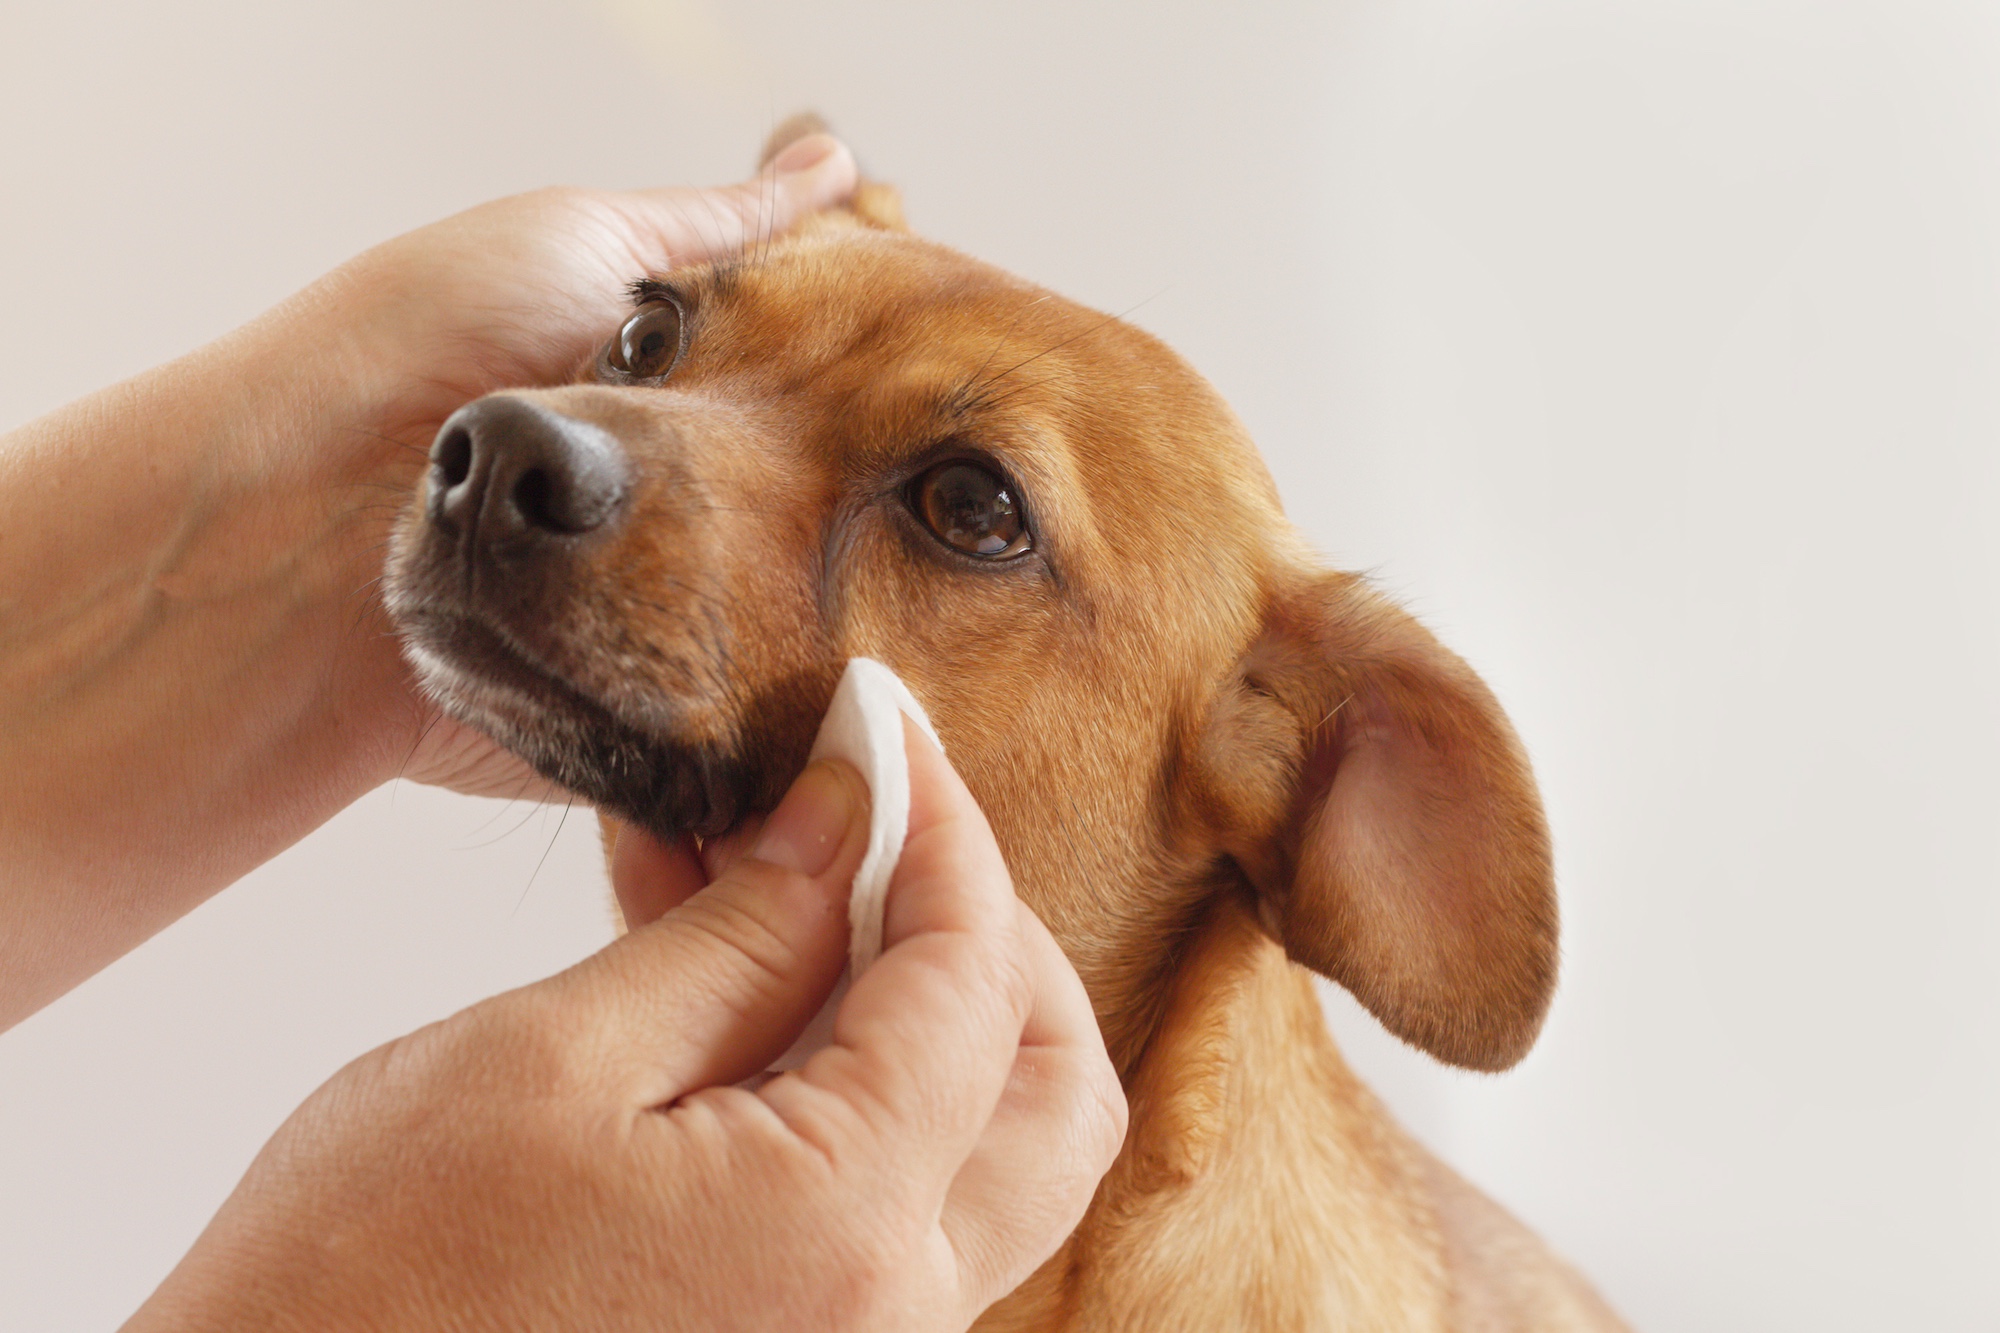 A person cleaning near a dog's eye with a cotton pad.